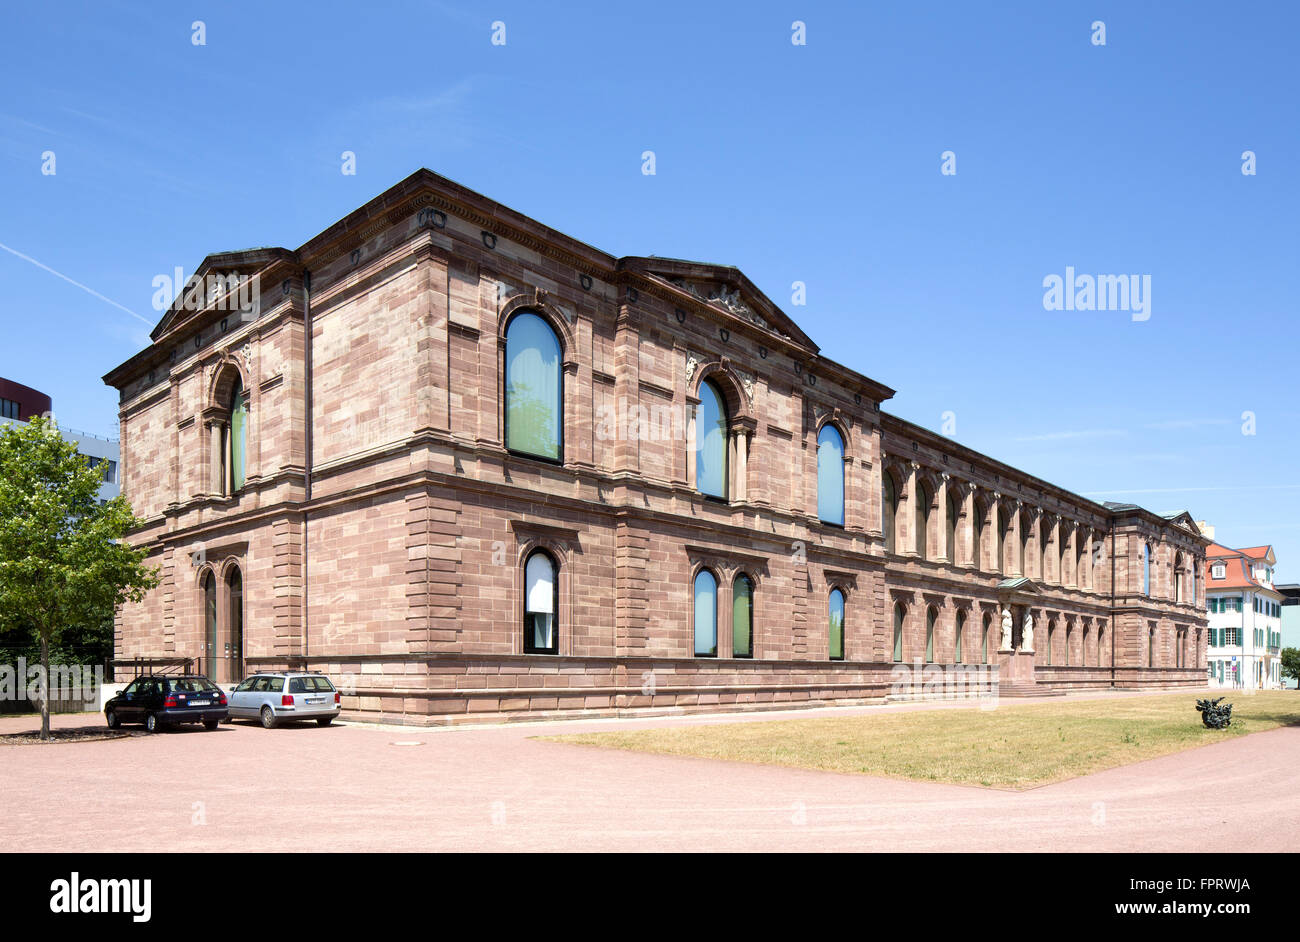 New Gallery from 1874, Art and Exhibition Hall, Bellevue, Kassel, Hesse, Germany Stock Photo